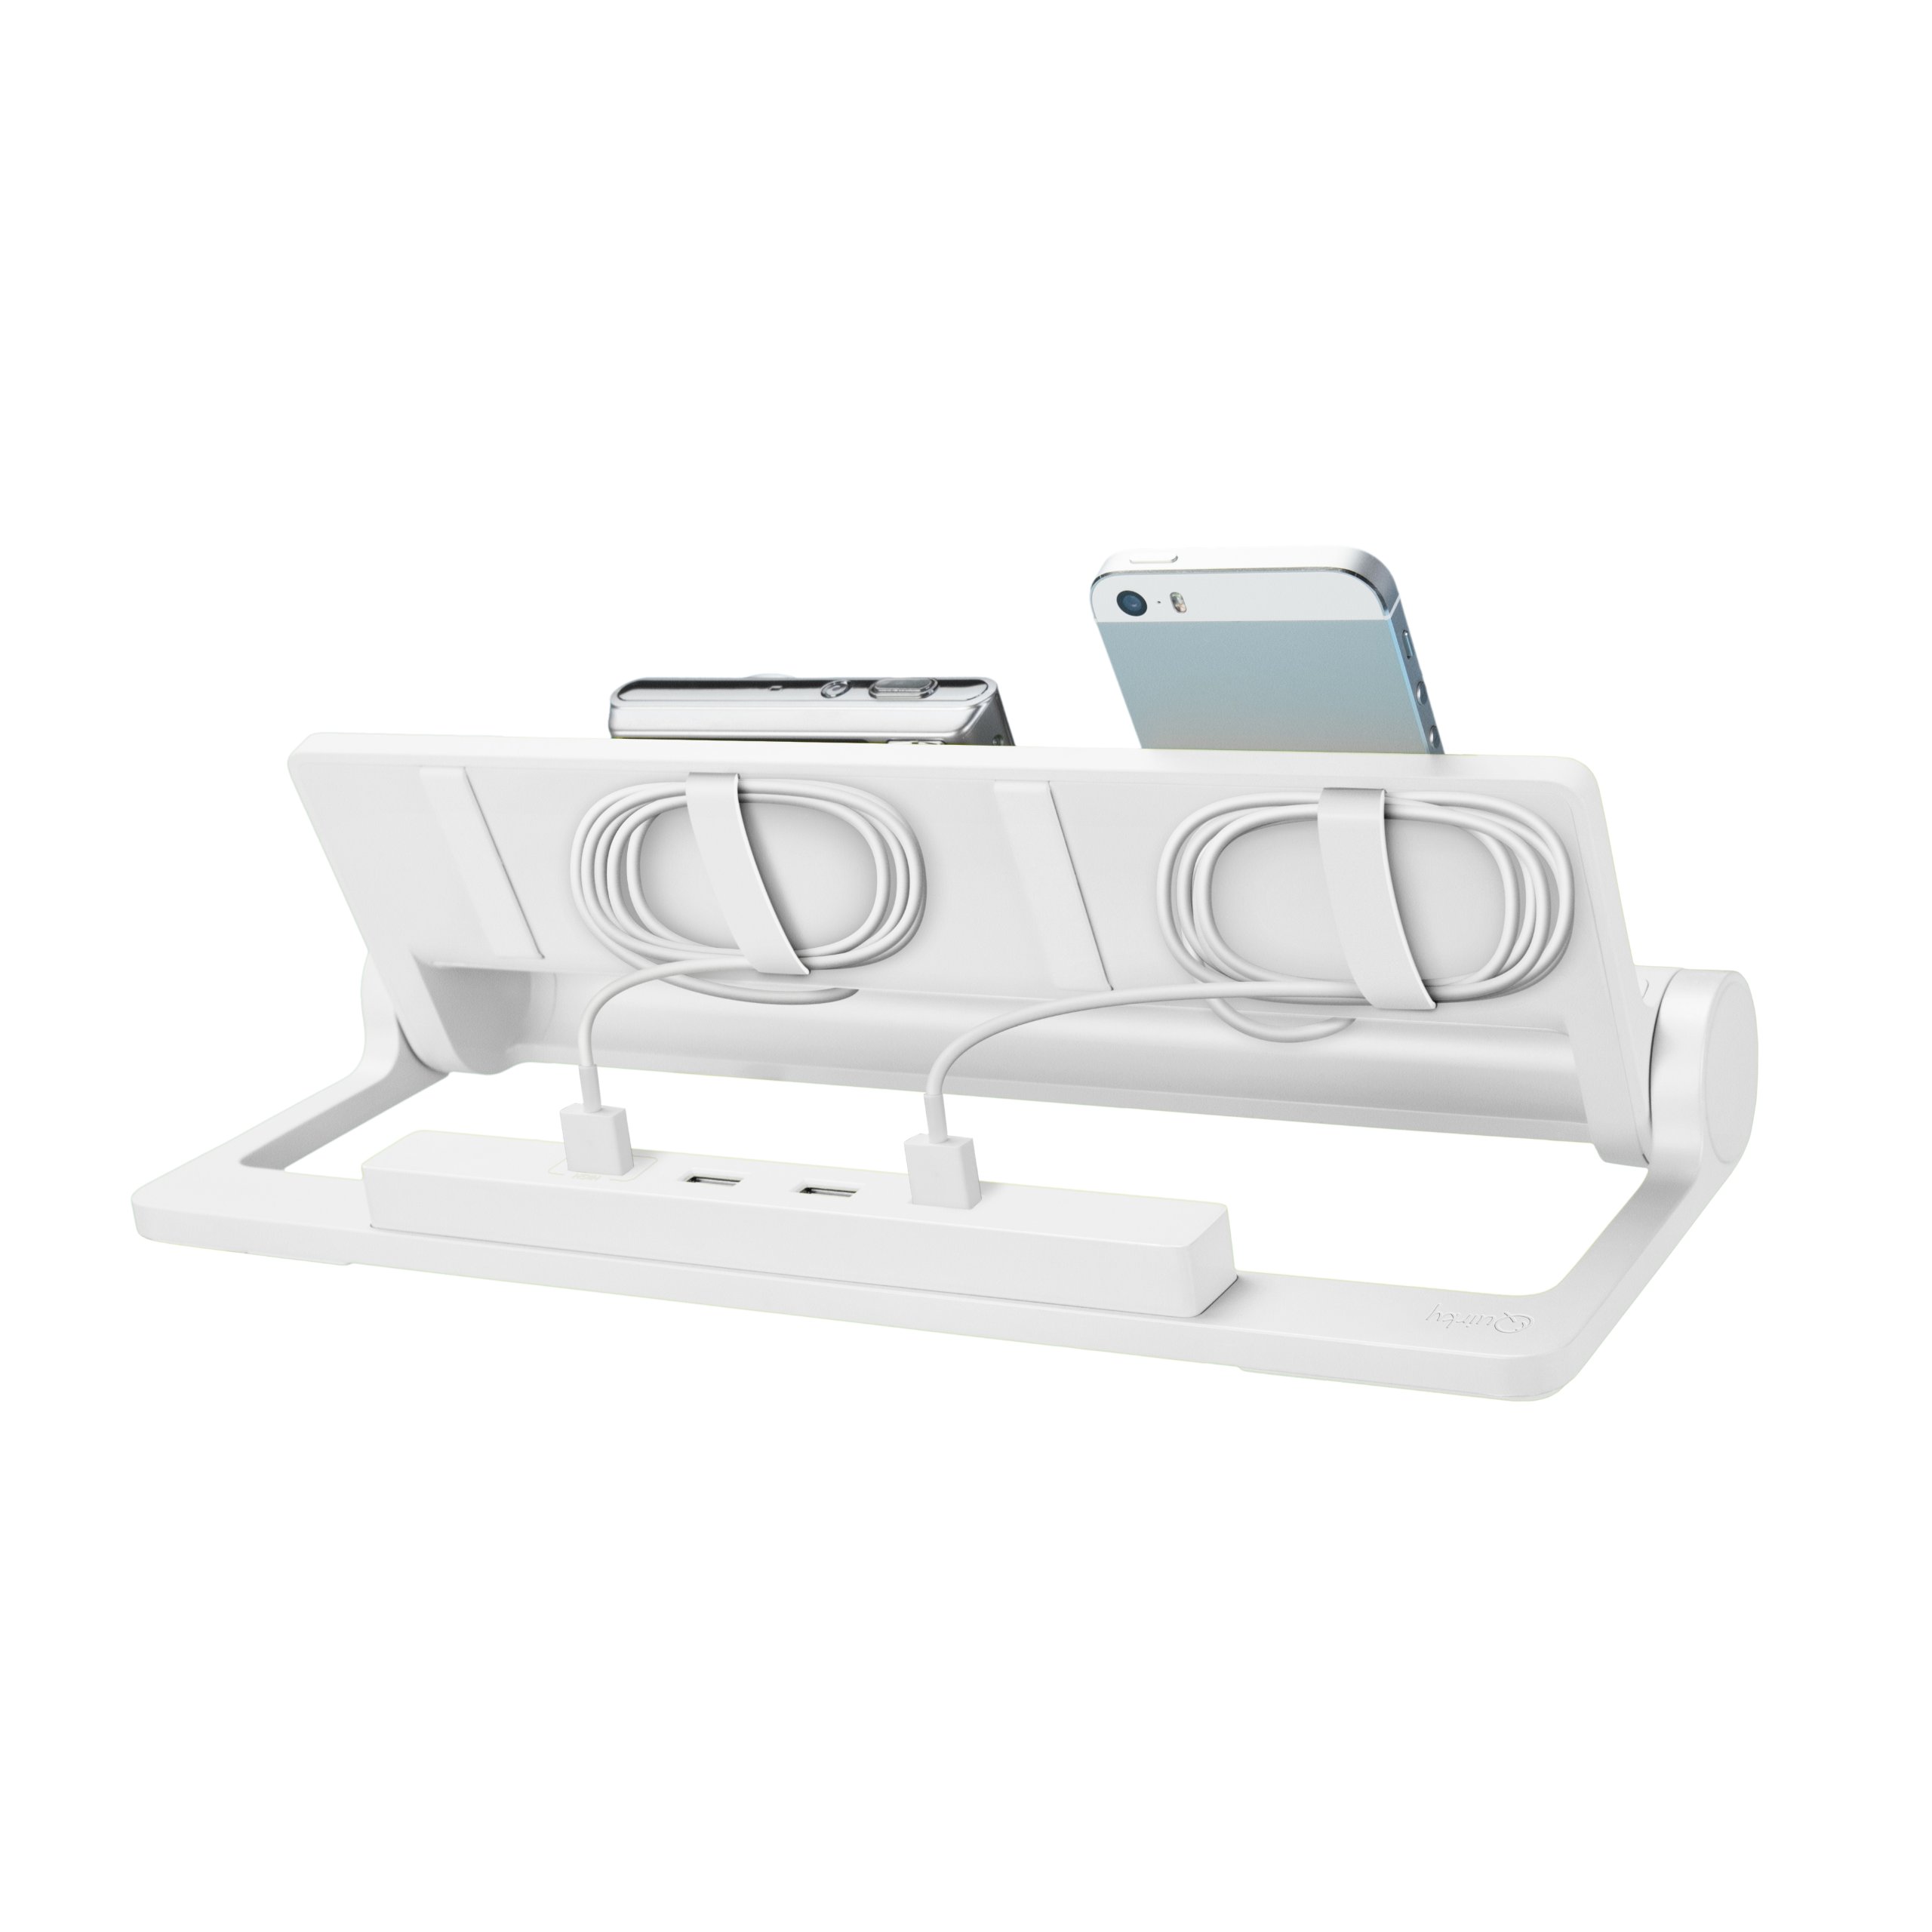 Quirky PCVG3-WH01 Converge Universal USB Docking Station, White